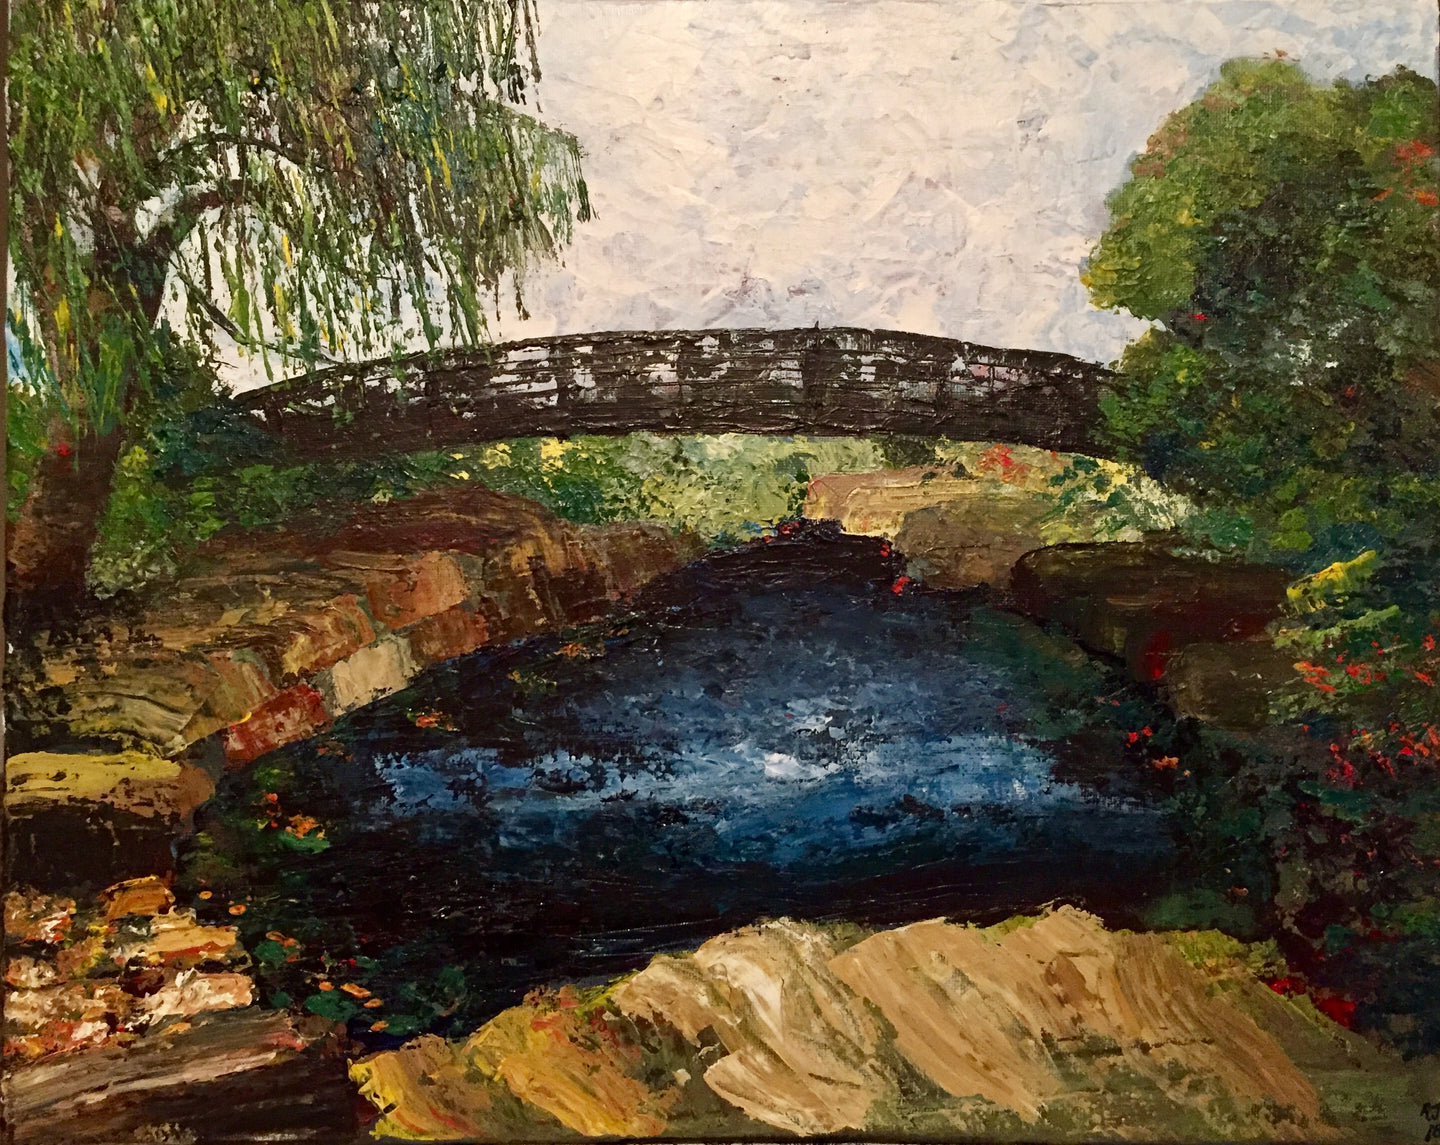 8x10 print of painting by Renee Wetzel. Bridge over water with trees